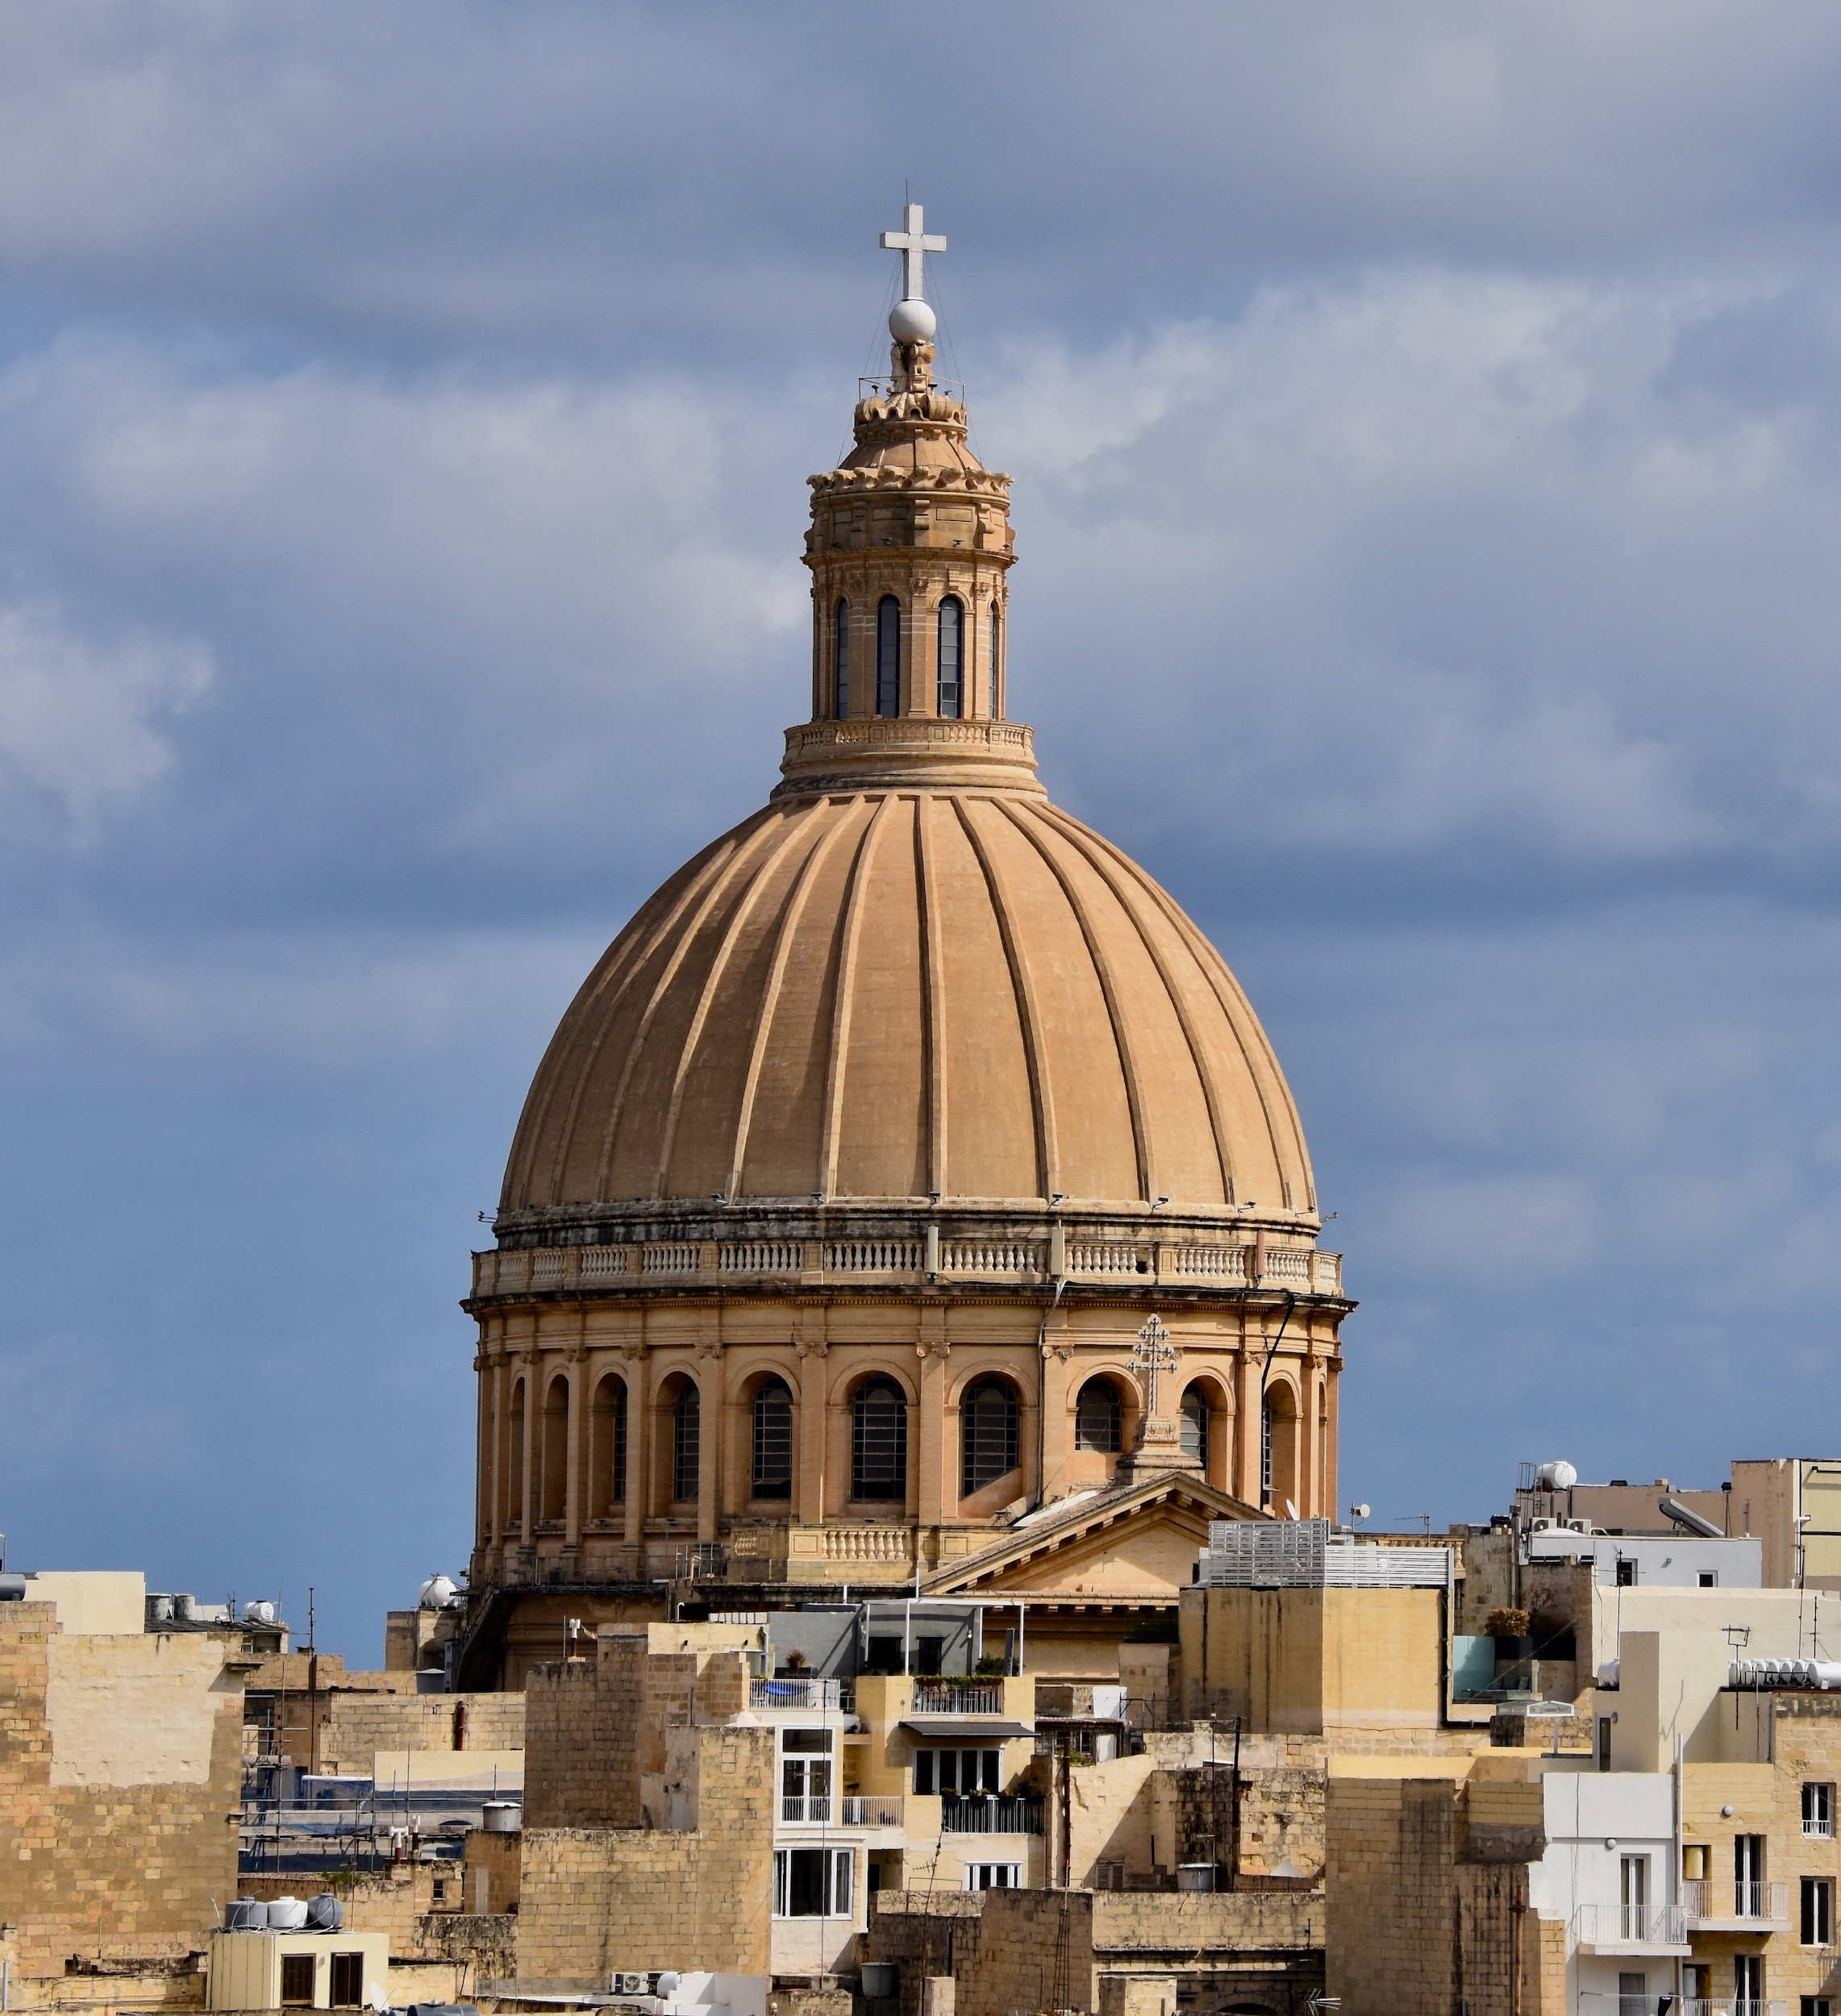  Church of Our Lady of Mount Carmel, Valletta